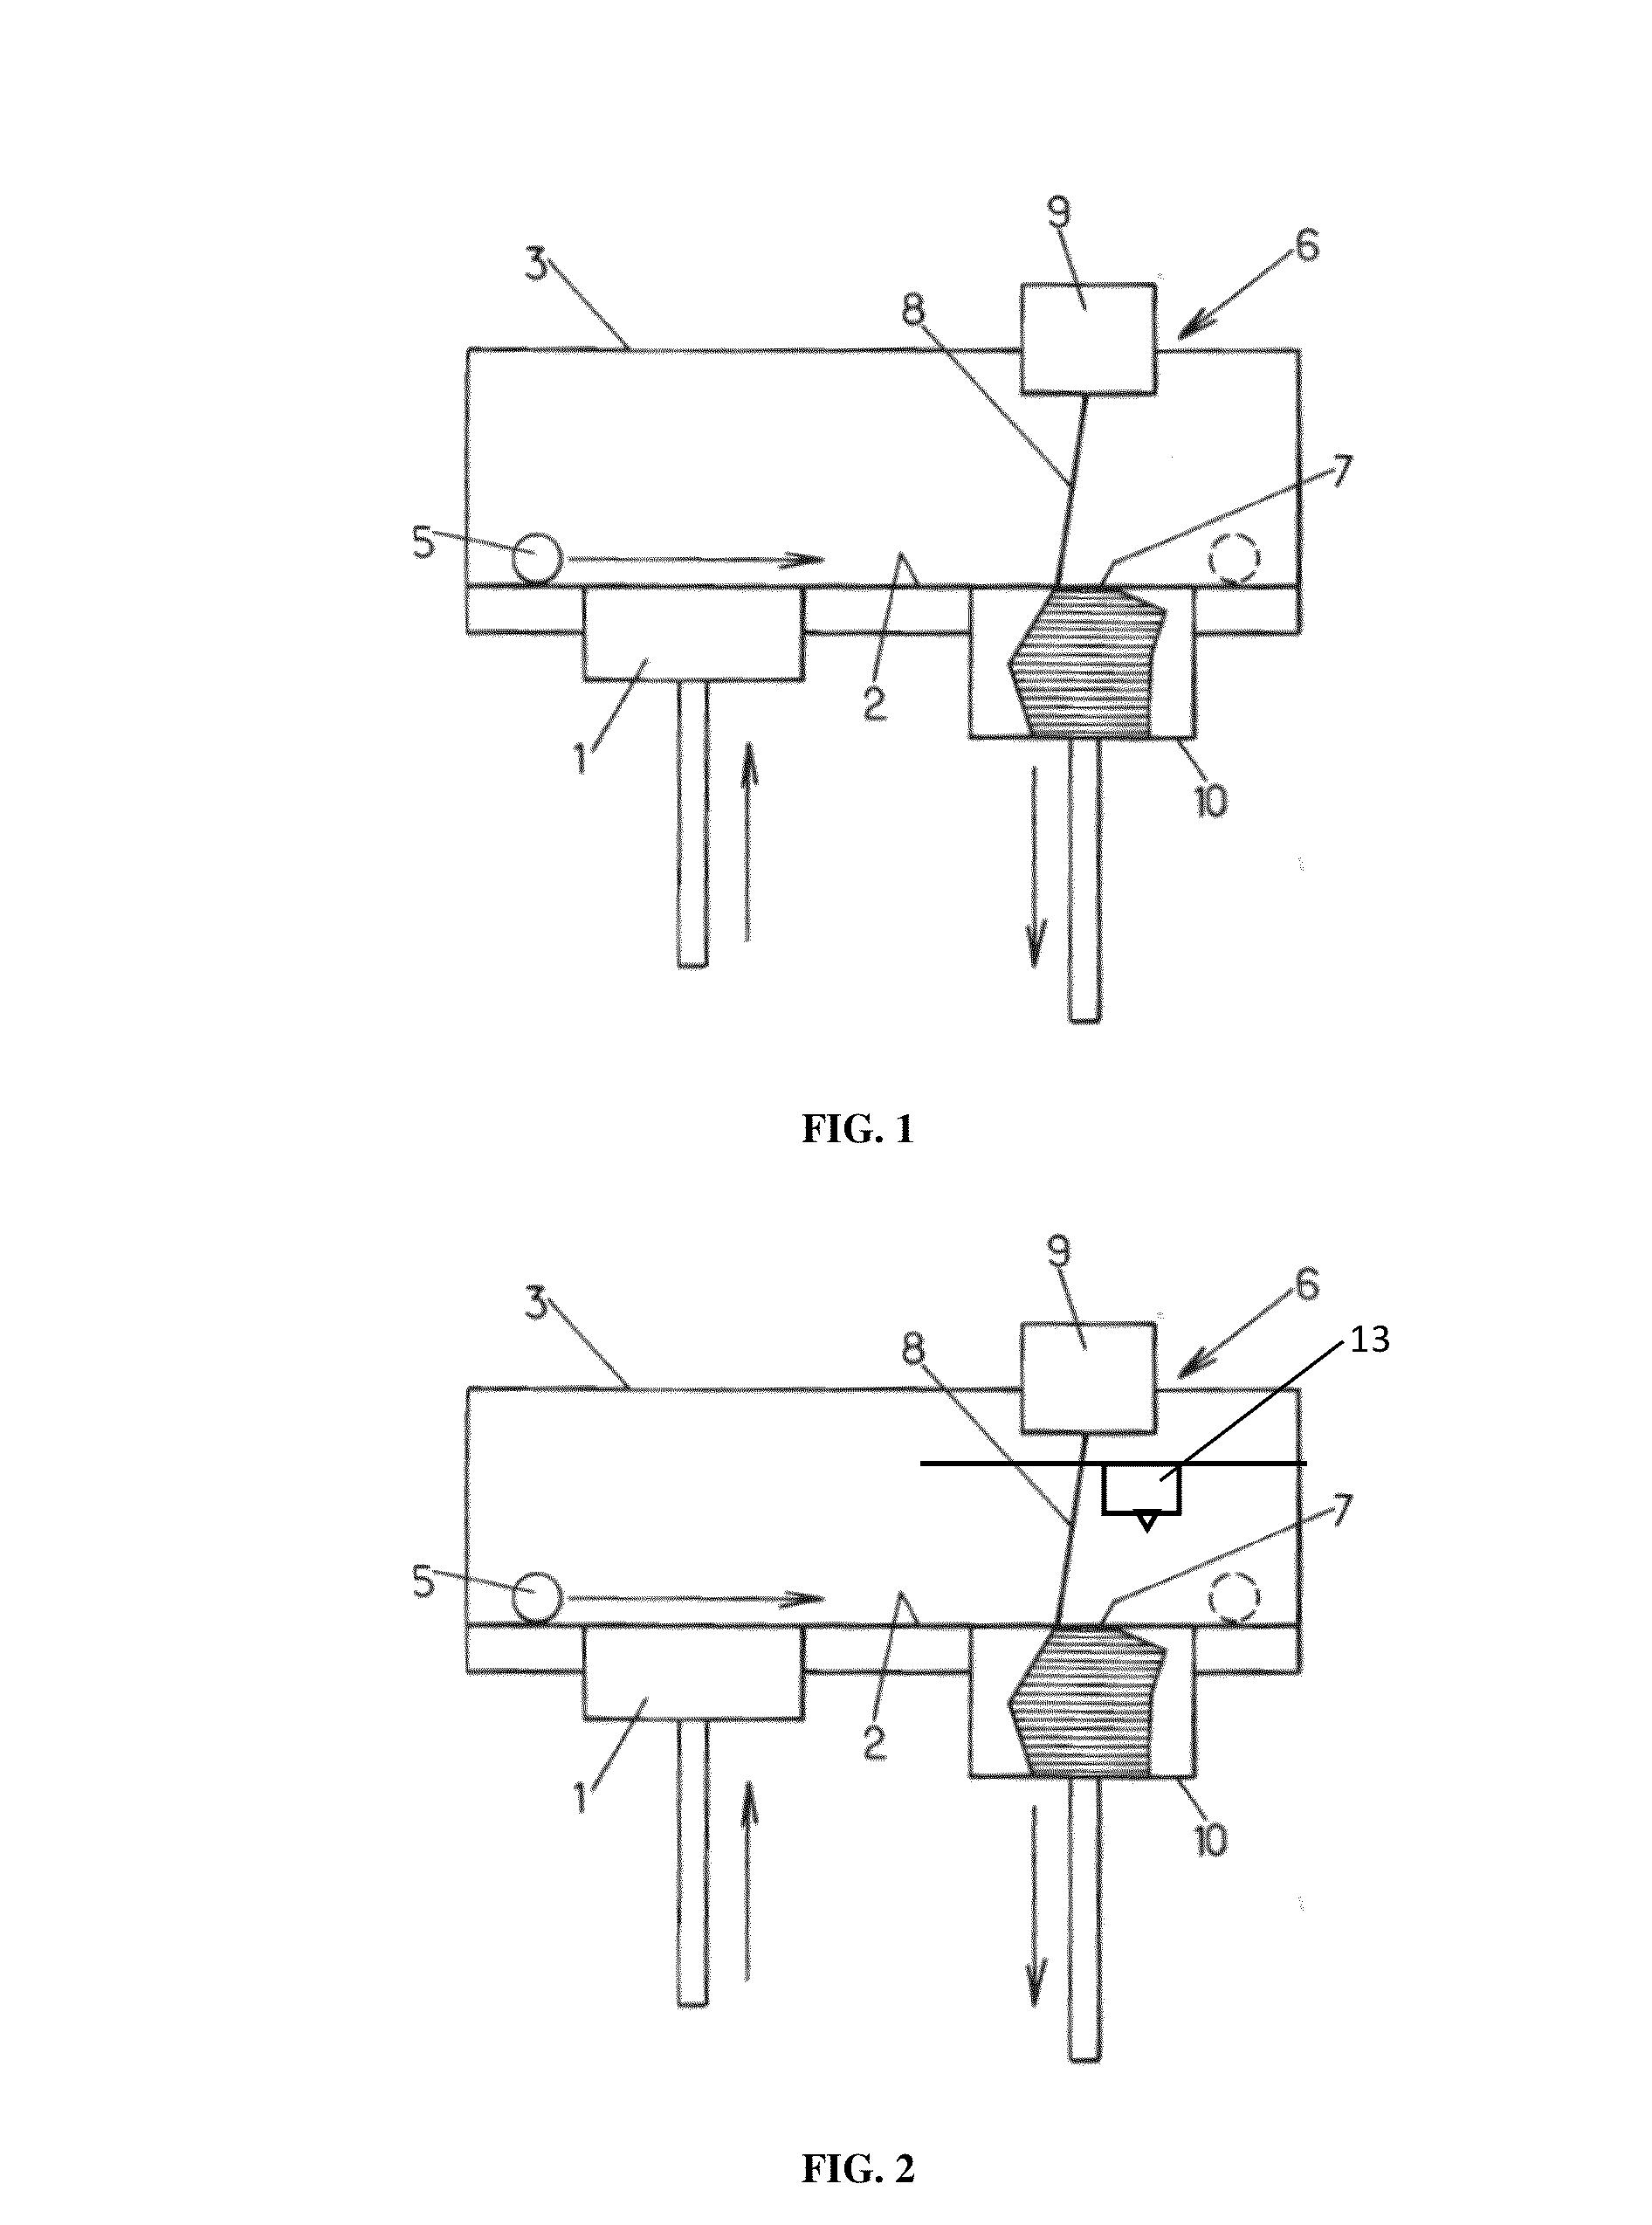 Biomedical device, method for manufacturing the same and use thereof